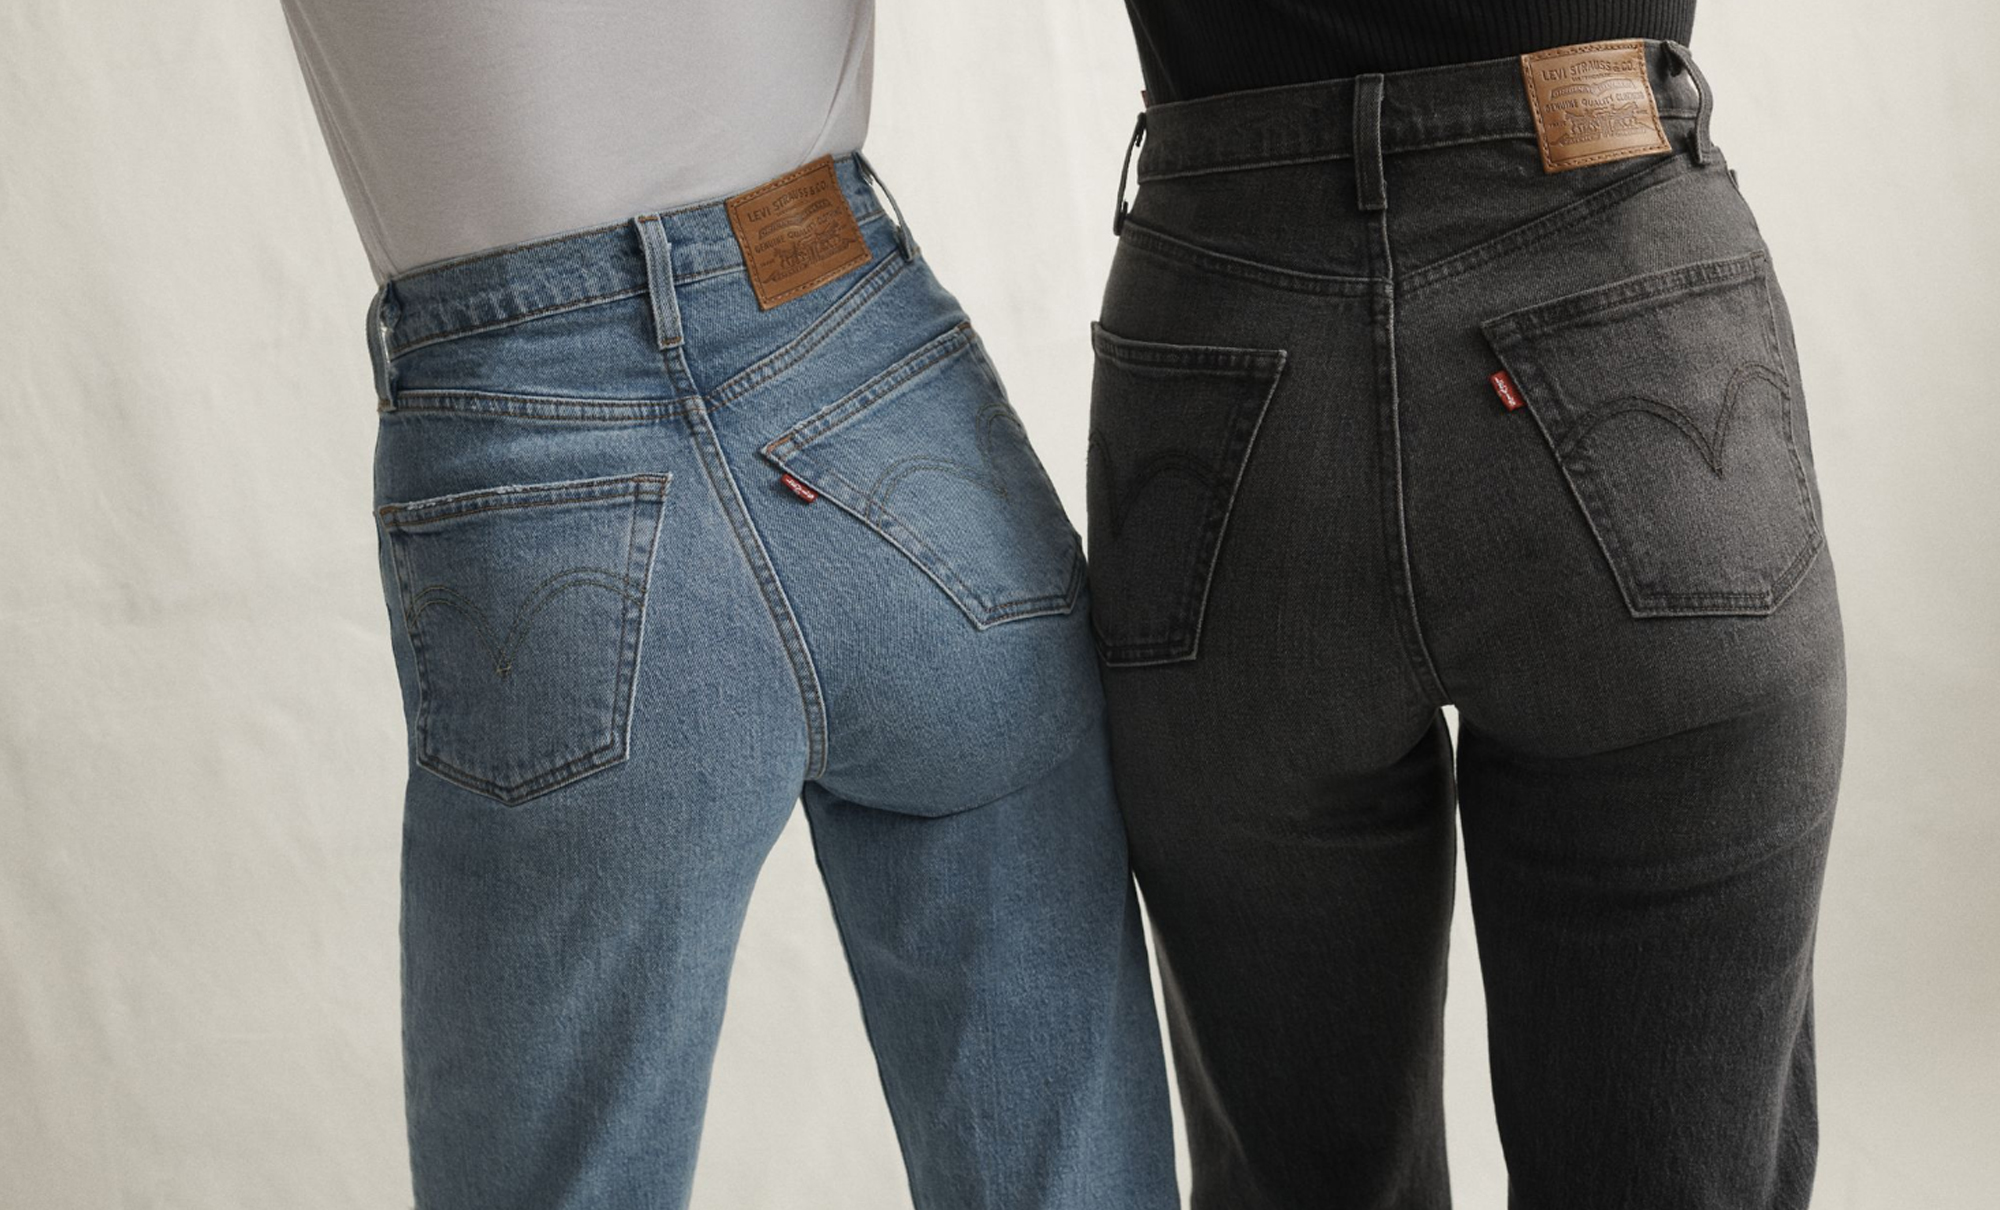 Staat Mevrouw ironie Nothing but Love for the 'Mom Jean' - Levi Strauss & Co : Levi Strauss & Co